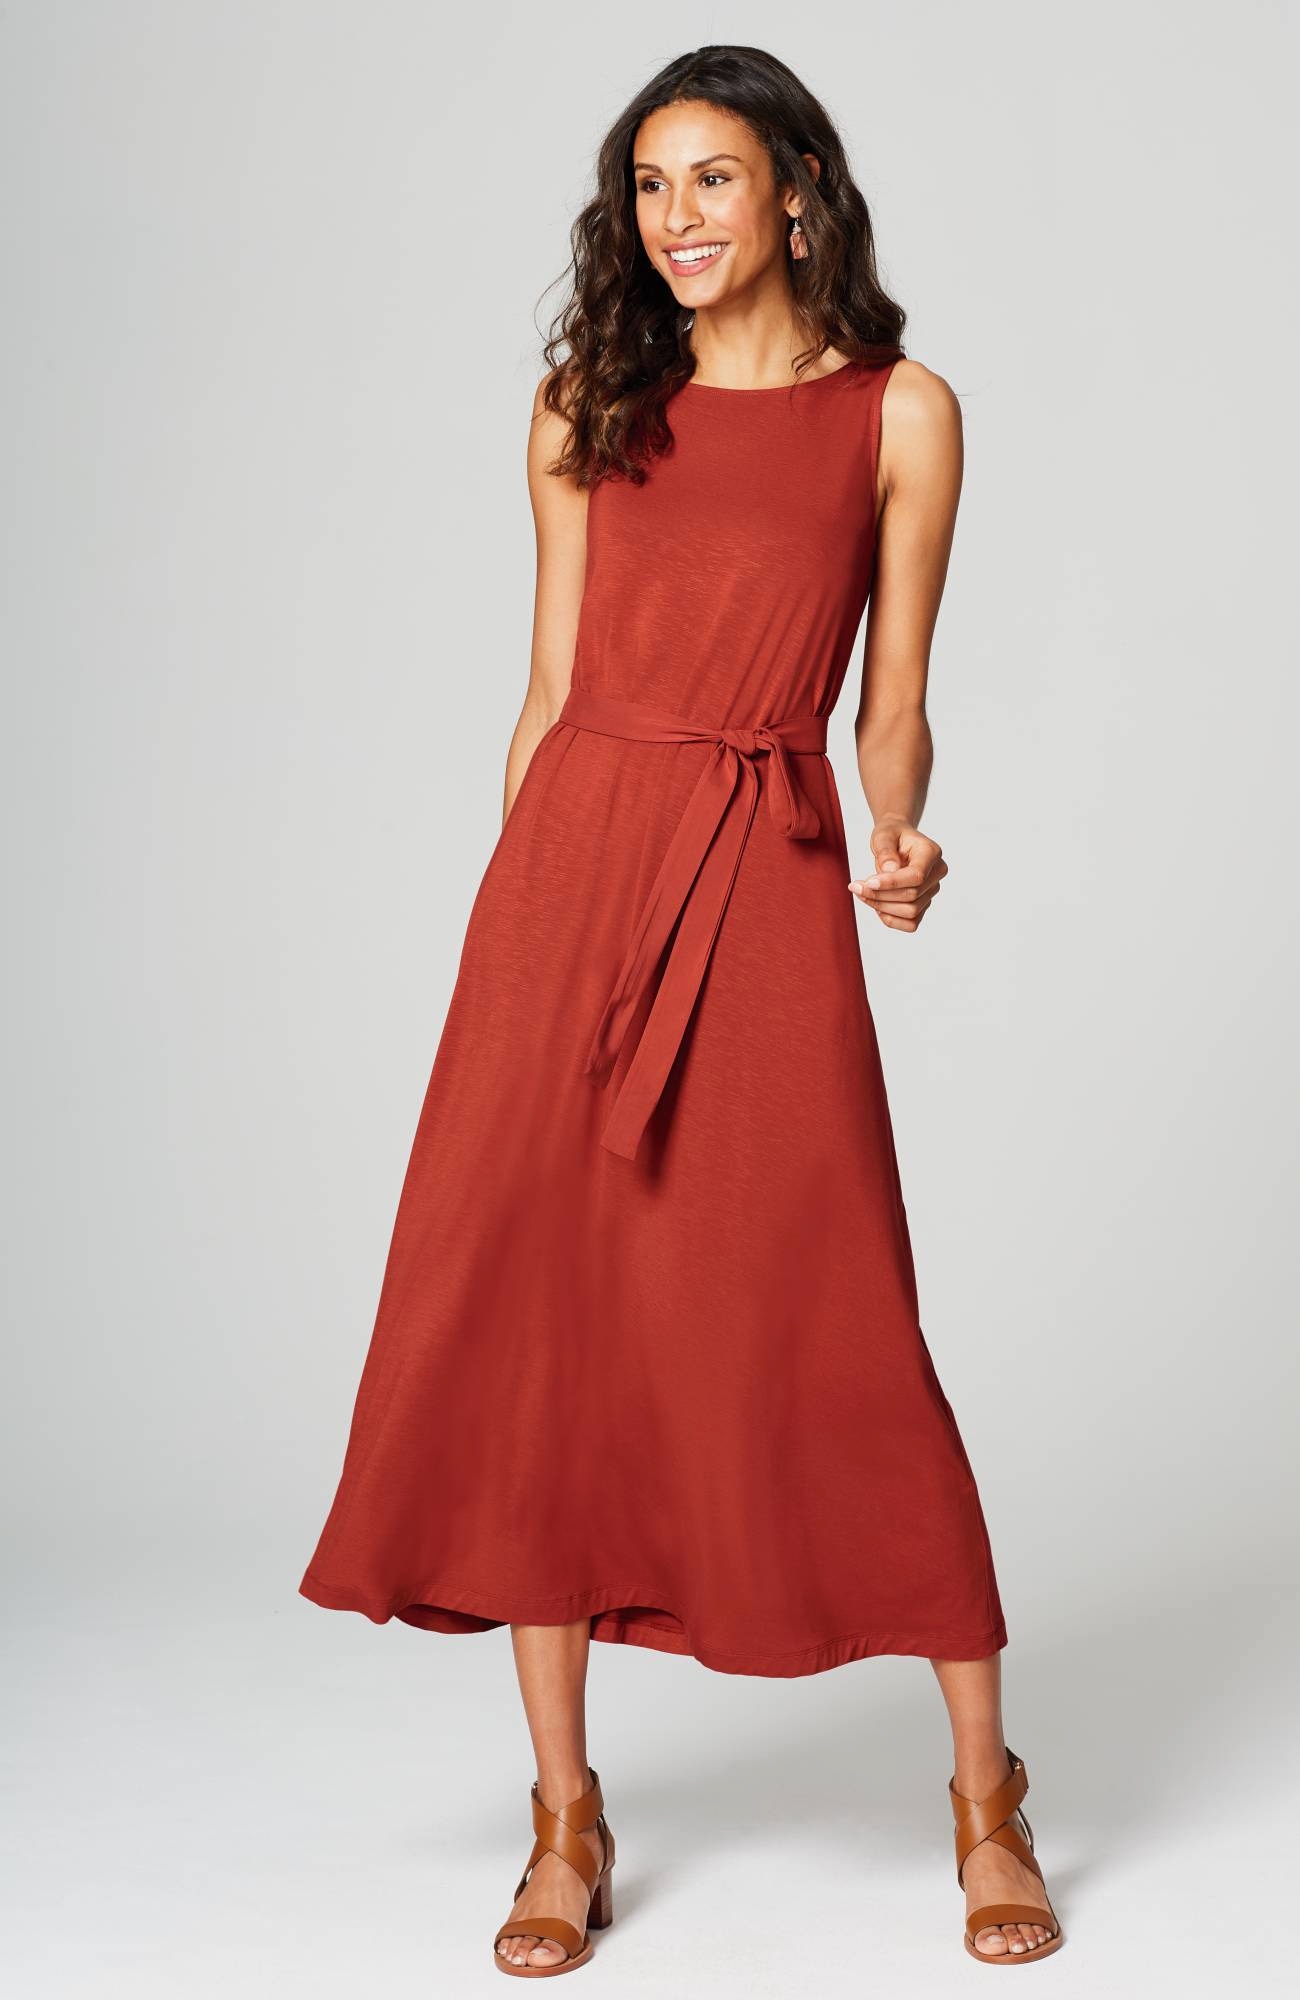 red form fitting dress